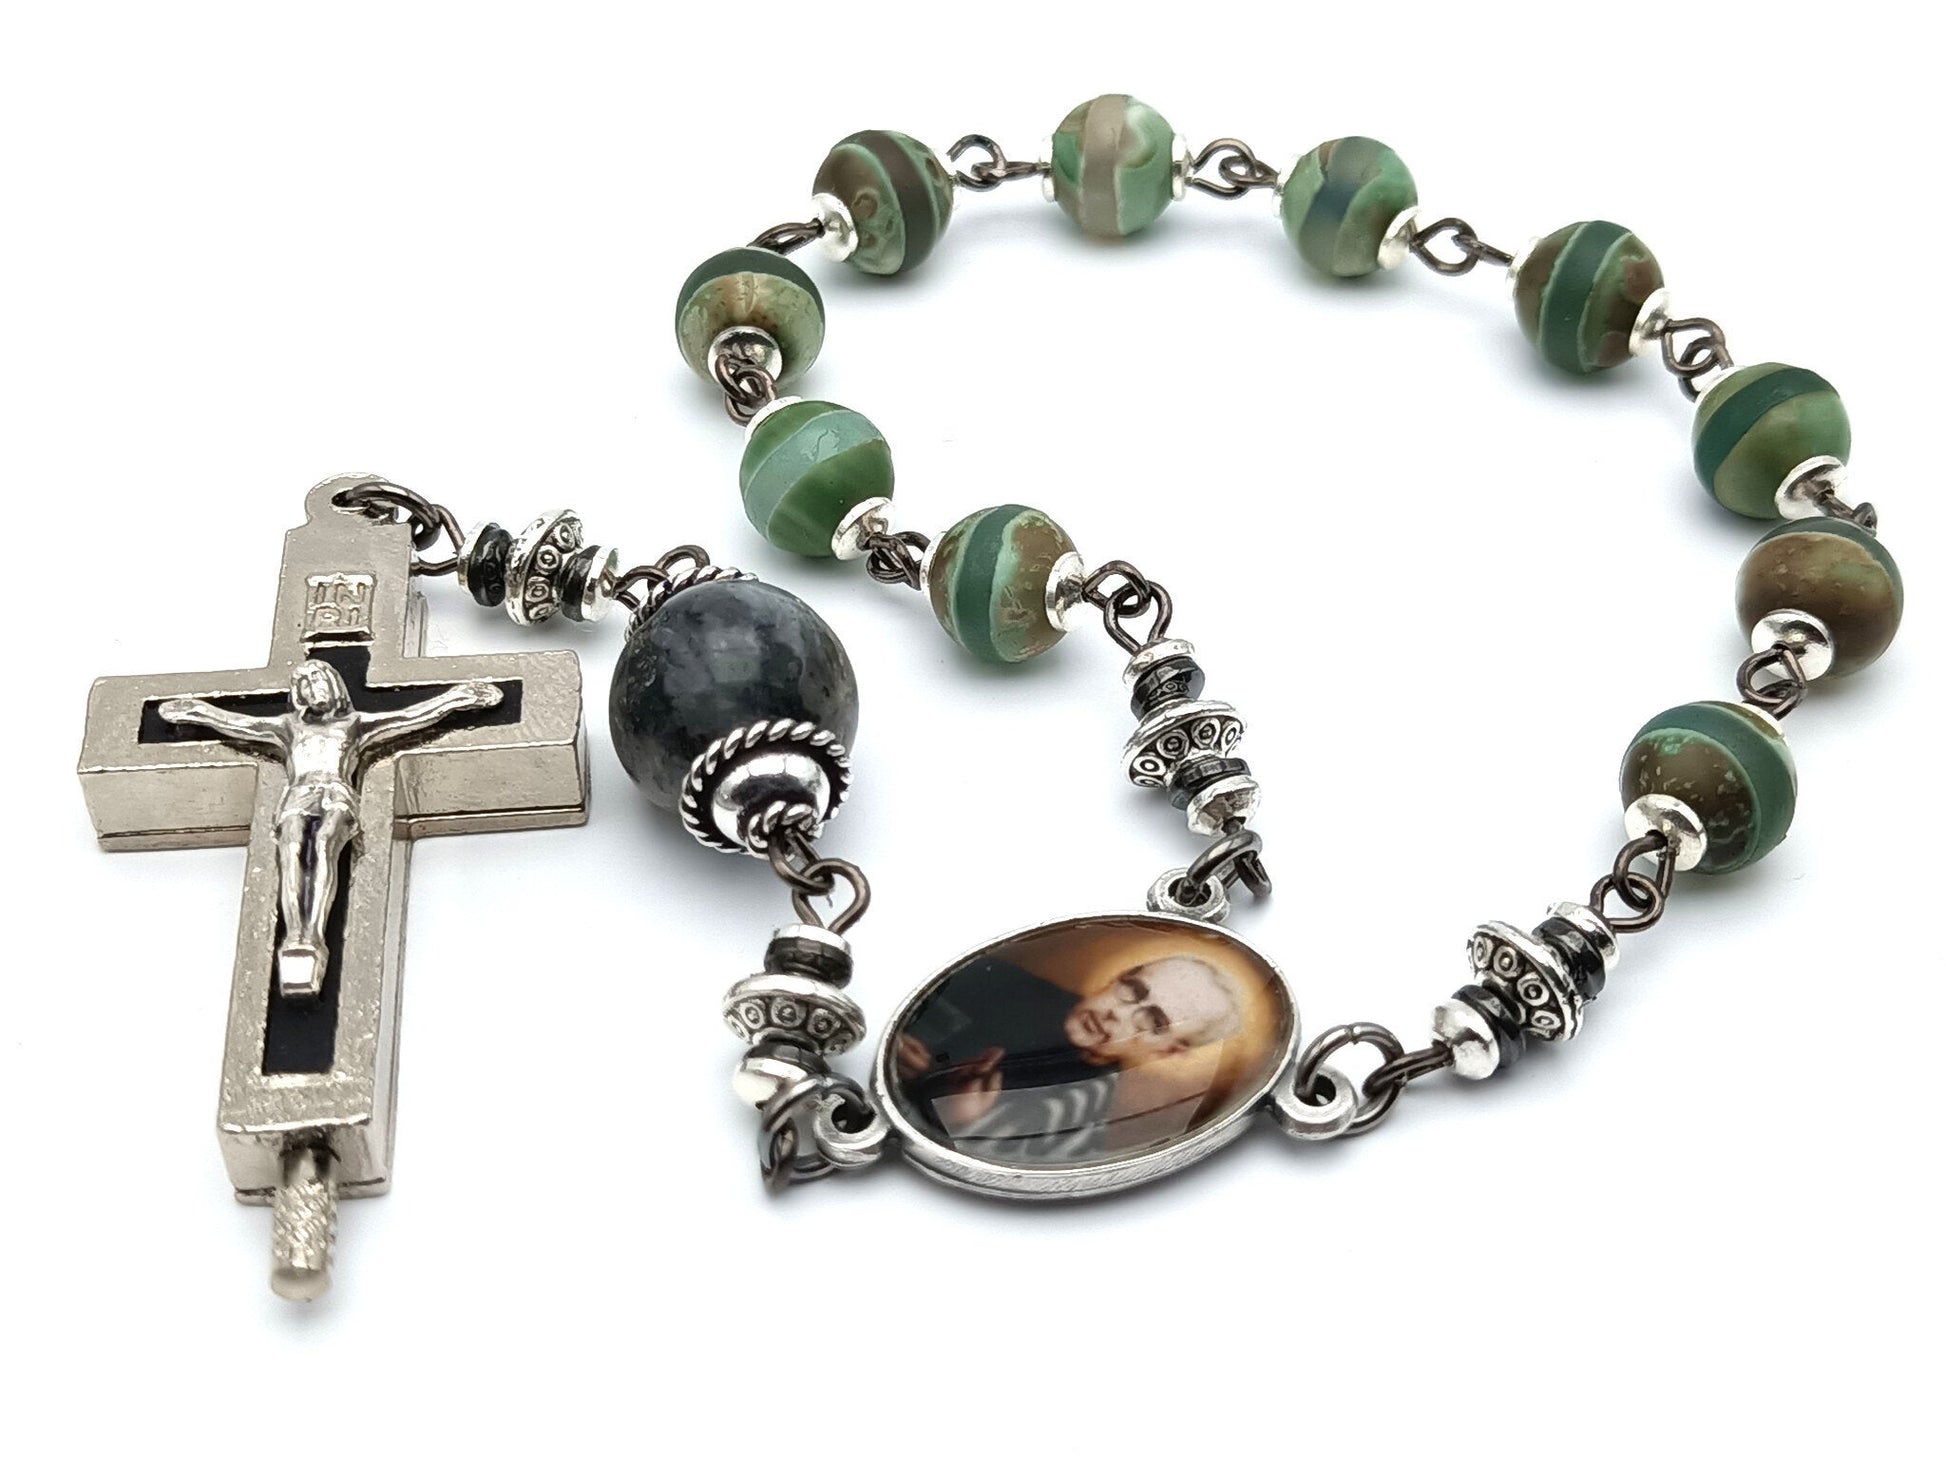 Saint Maximillian Kolbe unique rosary beads single decade with gemstone beads, silver and black relic holder crucifix and picture centre medal.